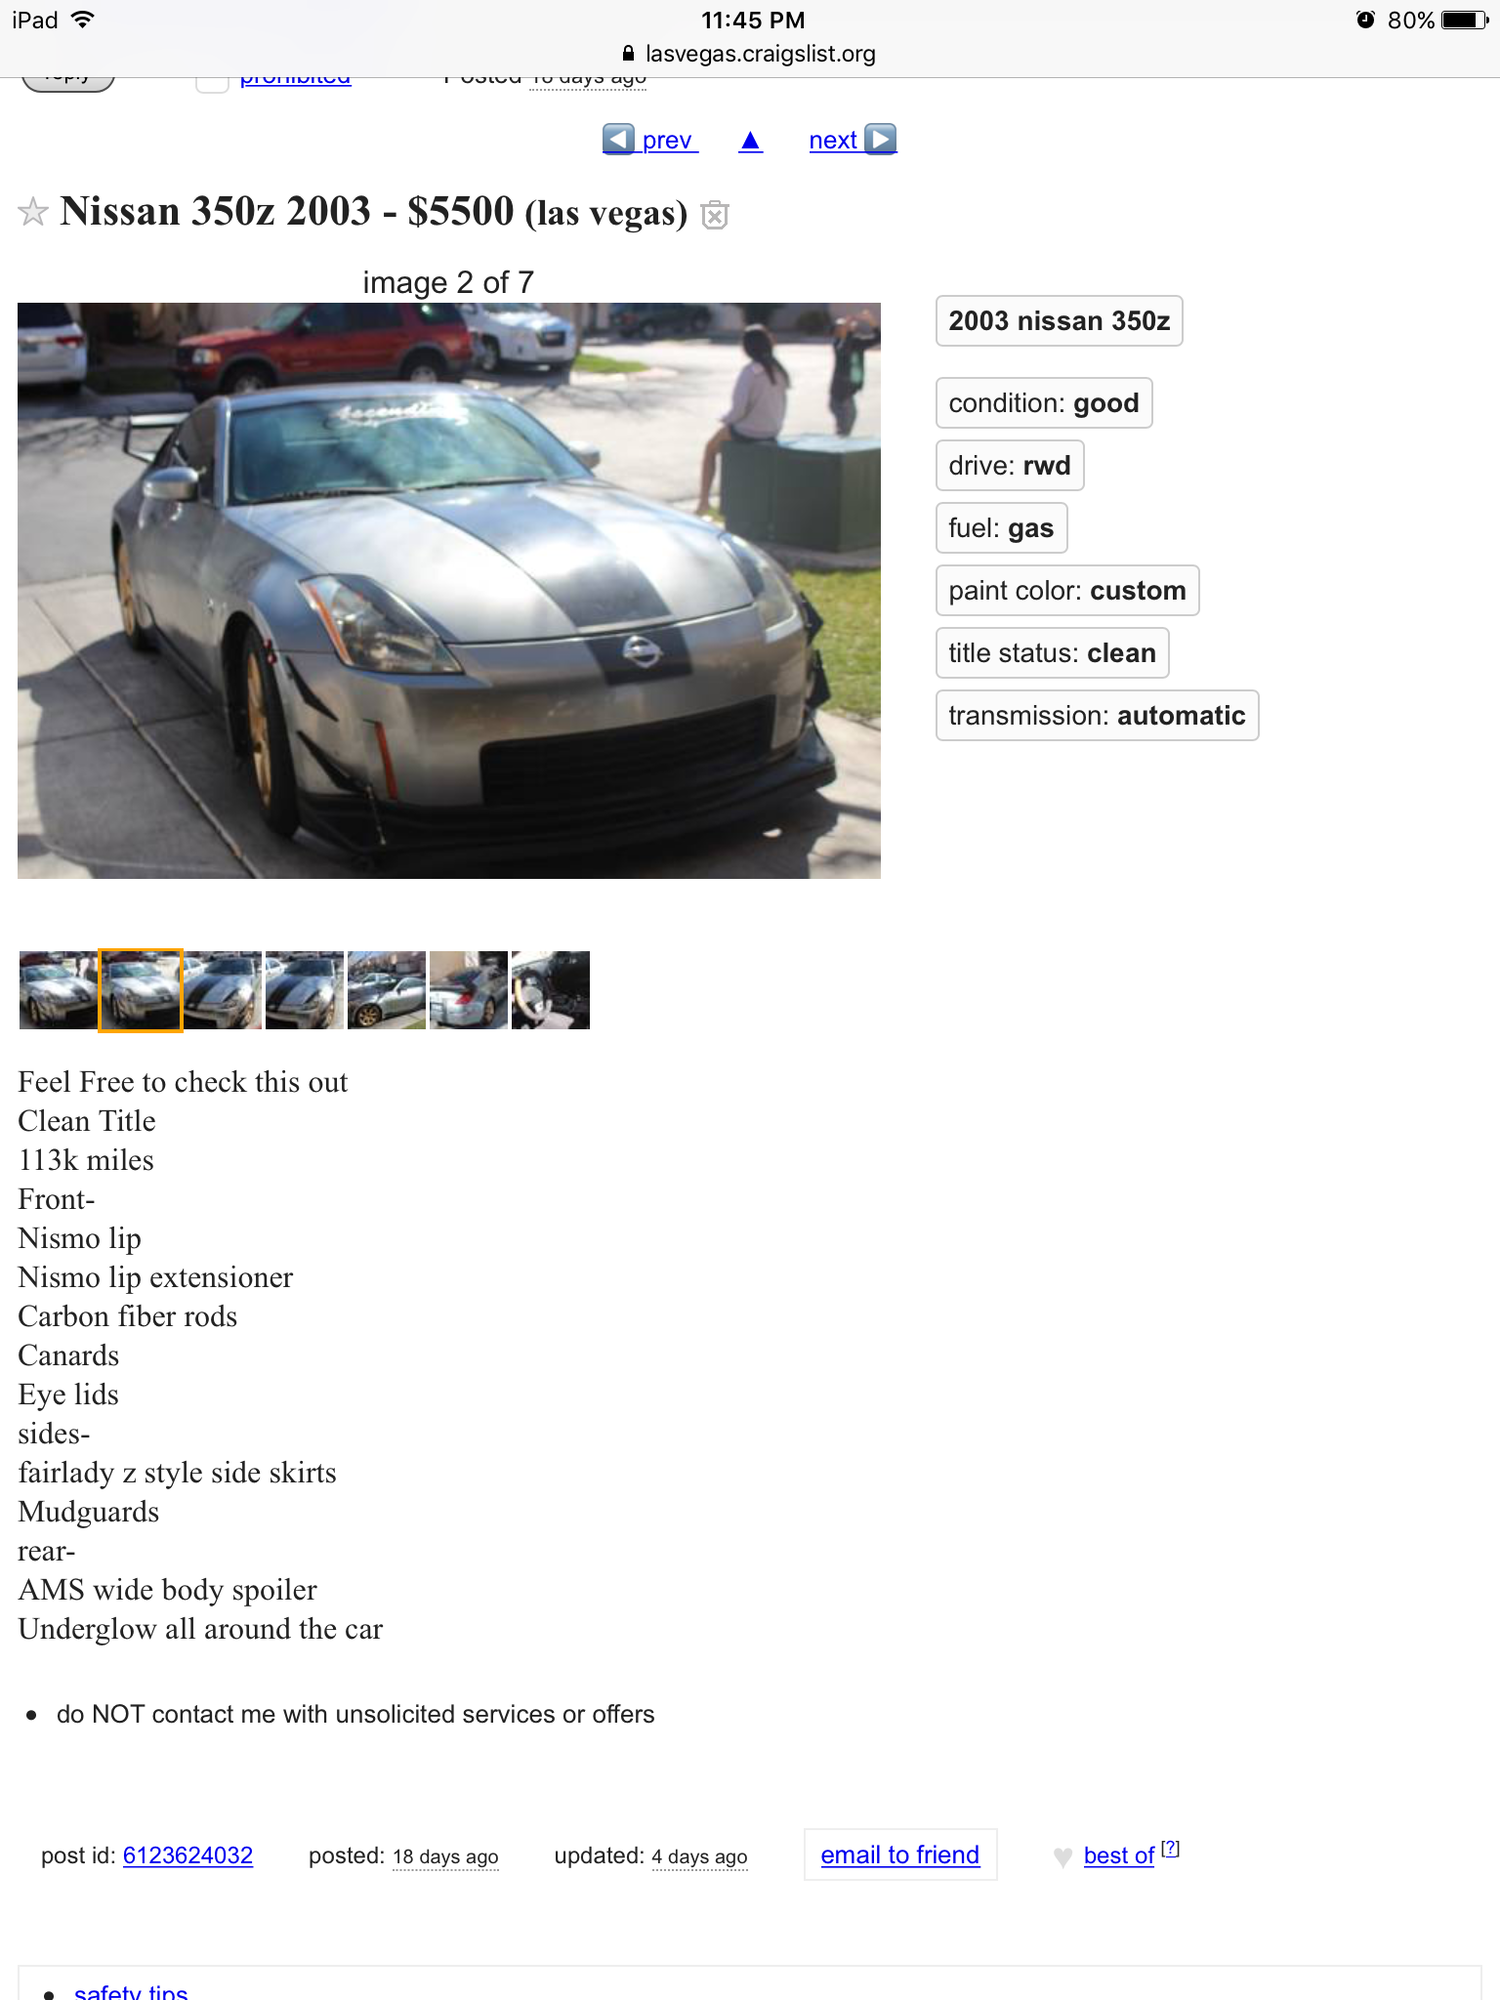 Can we have a Craigslist "Z Funnies" thread? - Page 6 ...